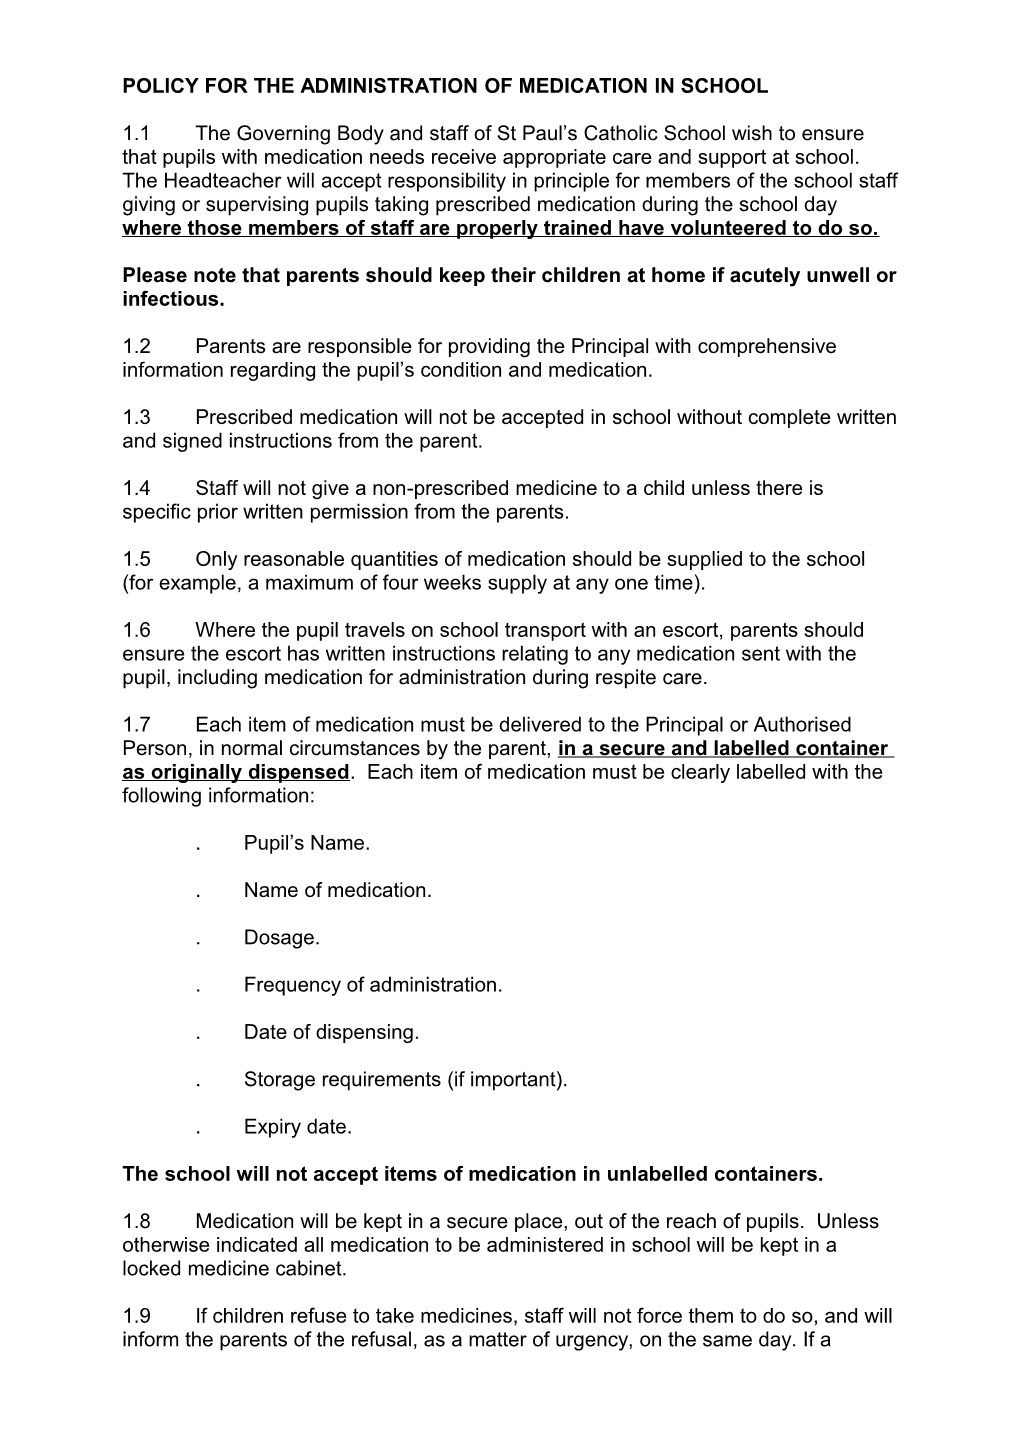 Section 5: Model Policy for the Administration of Medication in School